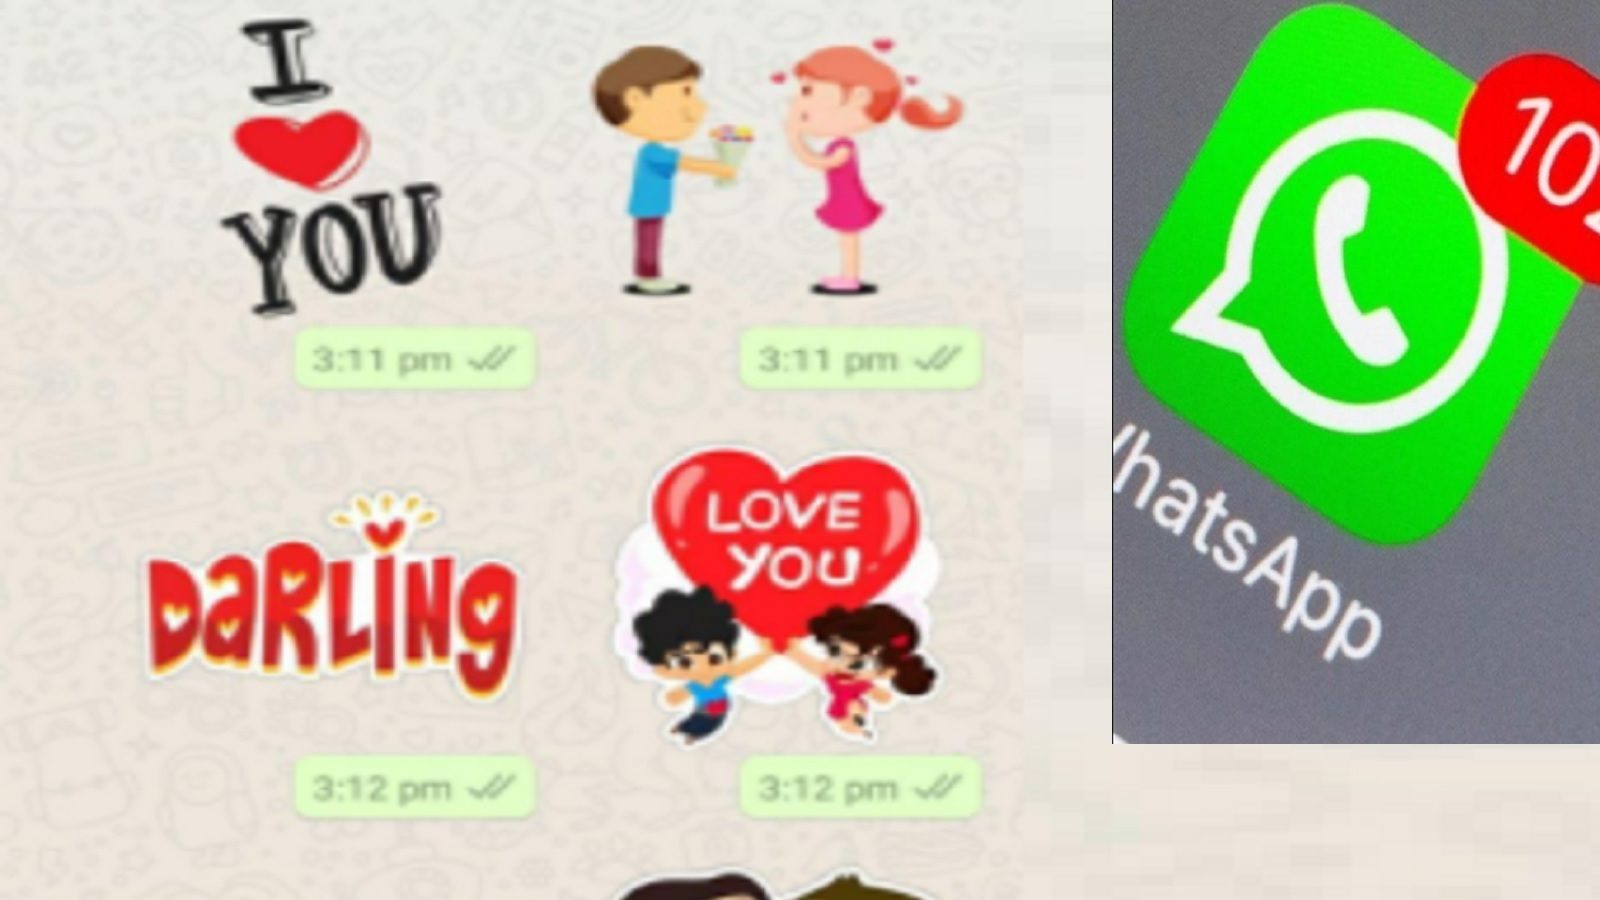 Happy Valentines Day 2022: Express your love to your partner by downloading this sticker easily